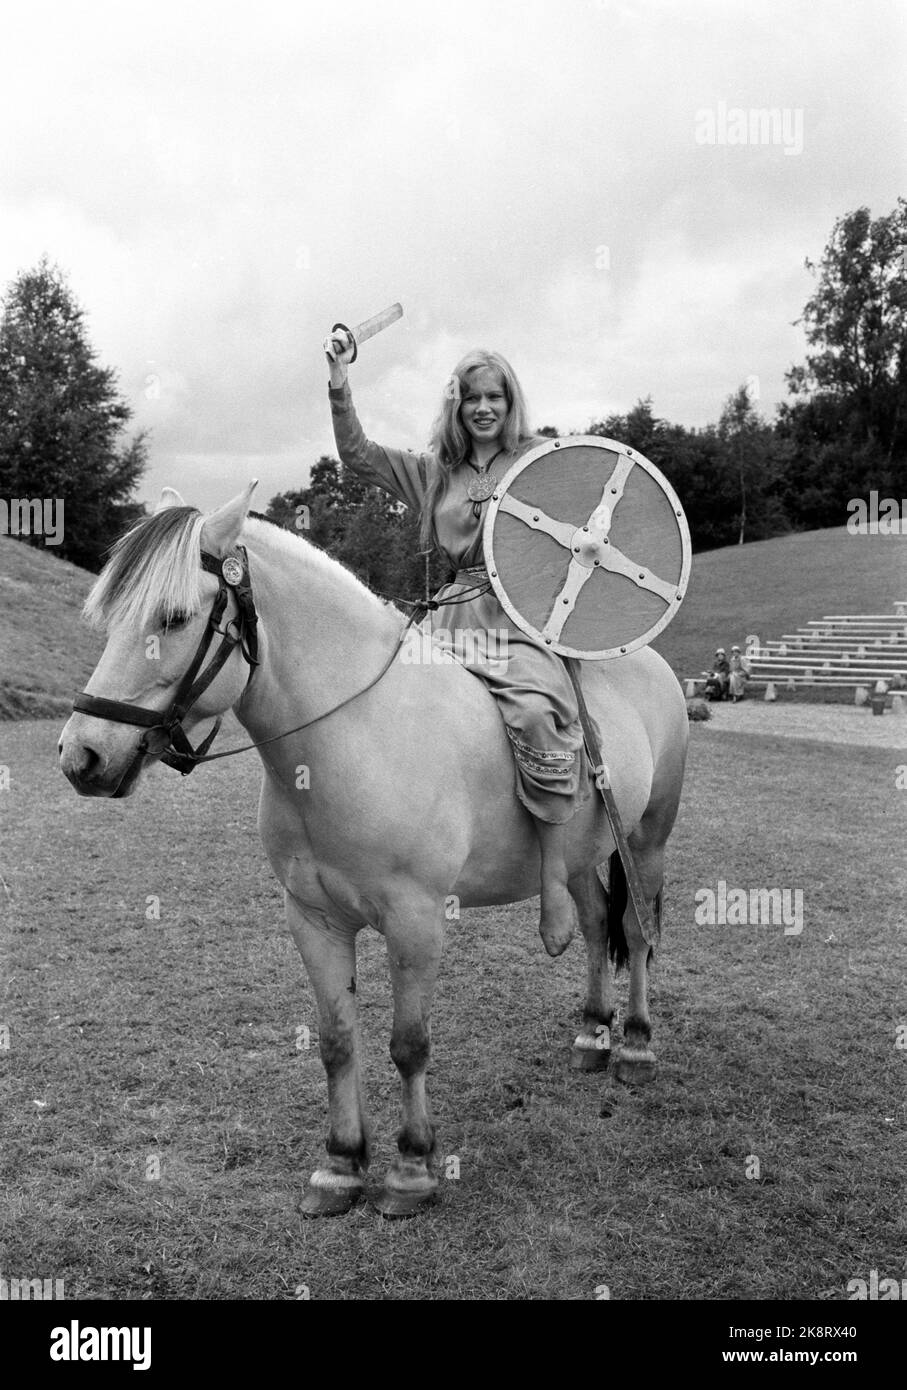 Stiklestad July 1961: 'The Game of Saint Olav' 200 waves draws every year in the Viking suit to highlight the night before the Battle of Stiklestad in the year 1030. The game is only going on for three days, and most foreign tourists miss a fantastic performance. Here is a young actress named Liv Ullmann who holds the role of Helga the beautiful. Photo: Sverre A. Børretzen / Current / NTB. Stock Photo